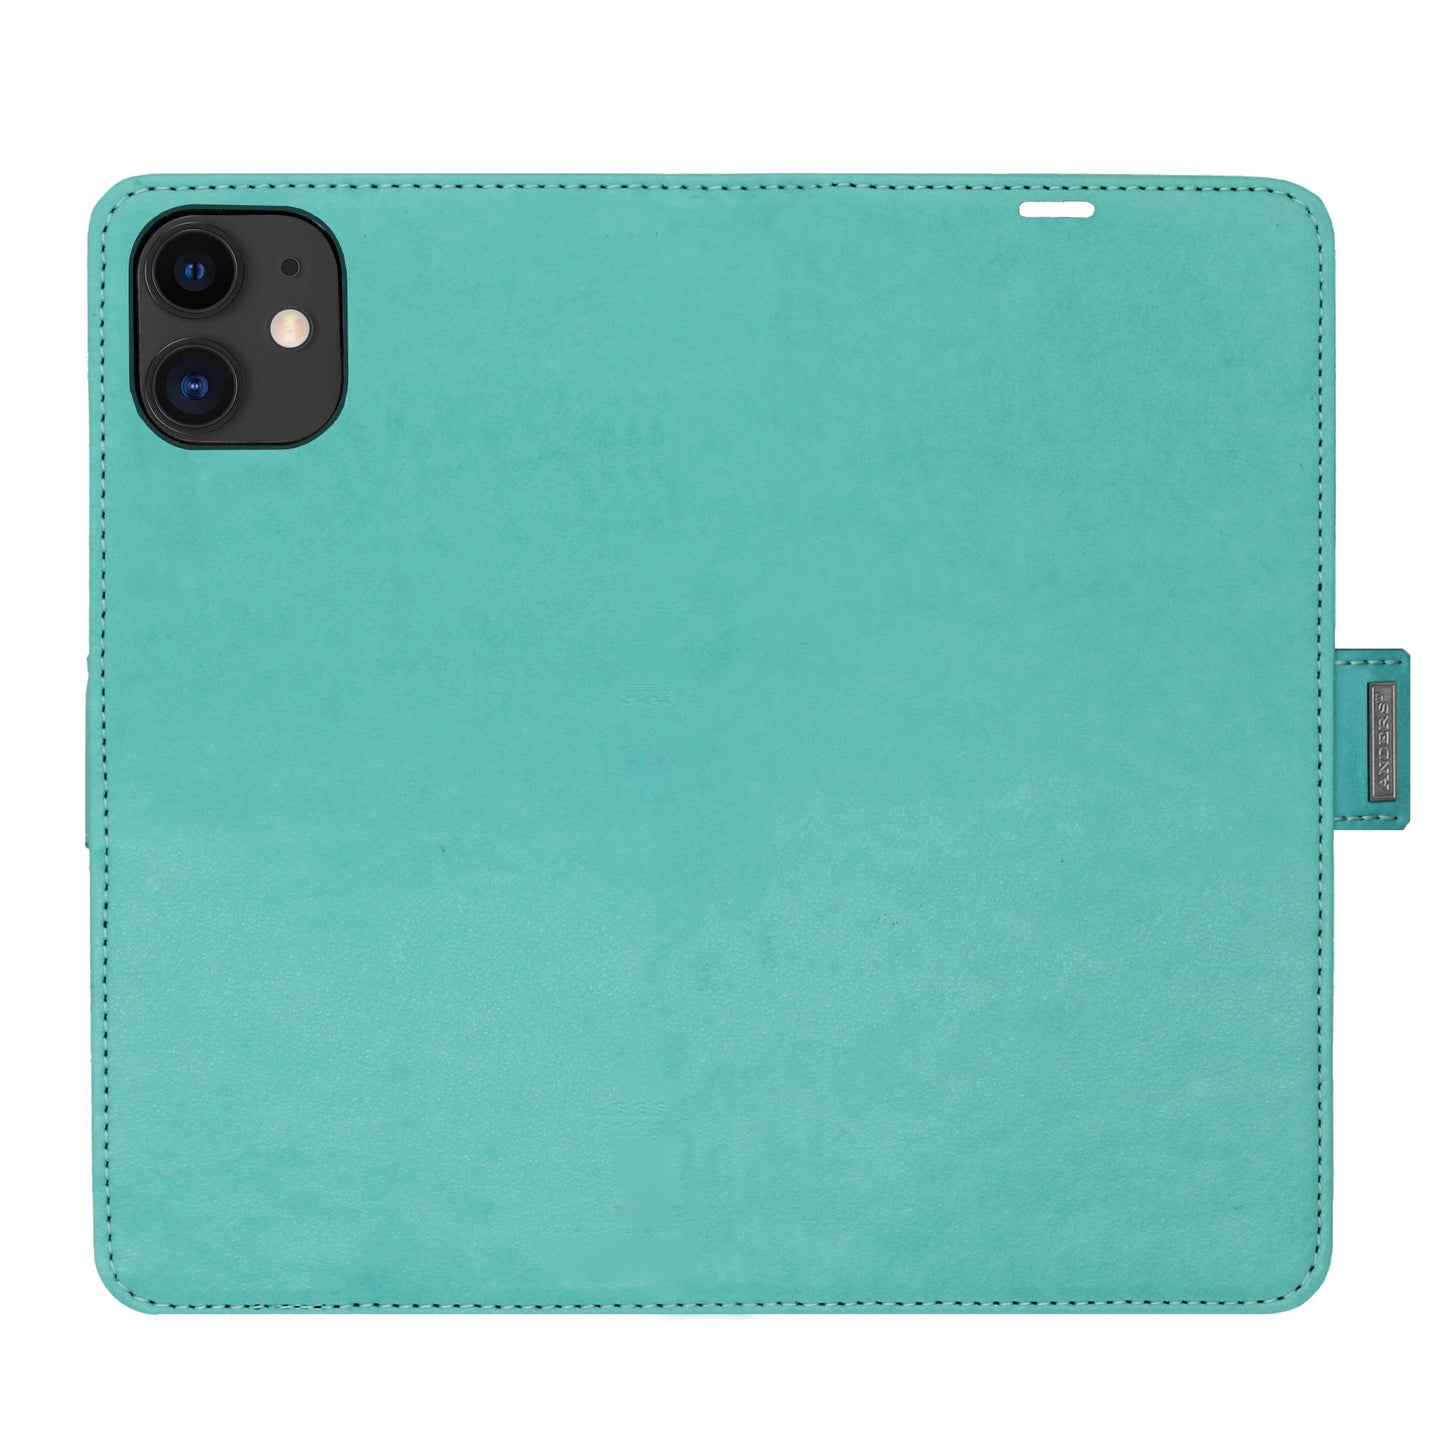 Uni Mint Victor Case for iPhone 11